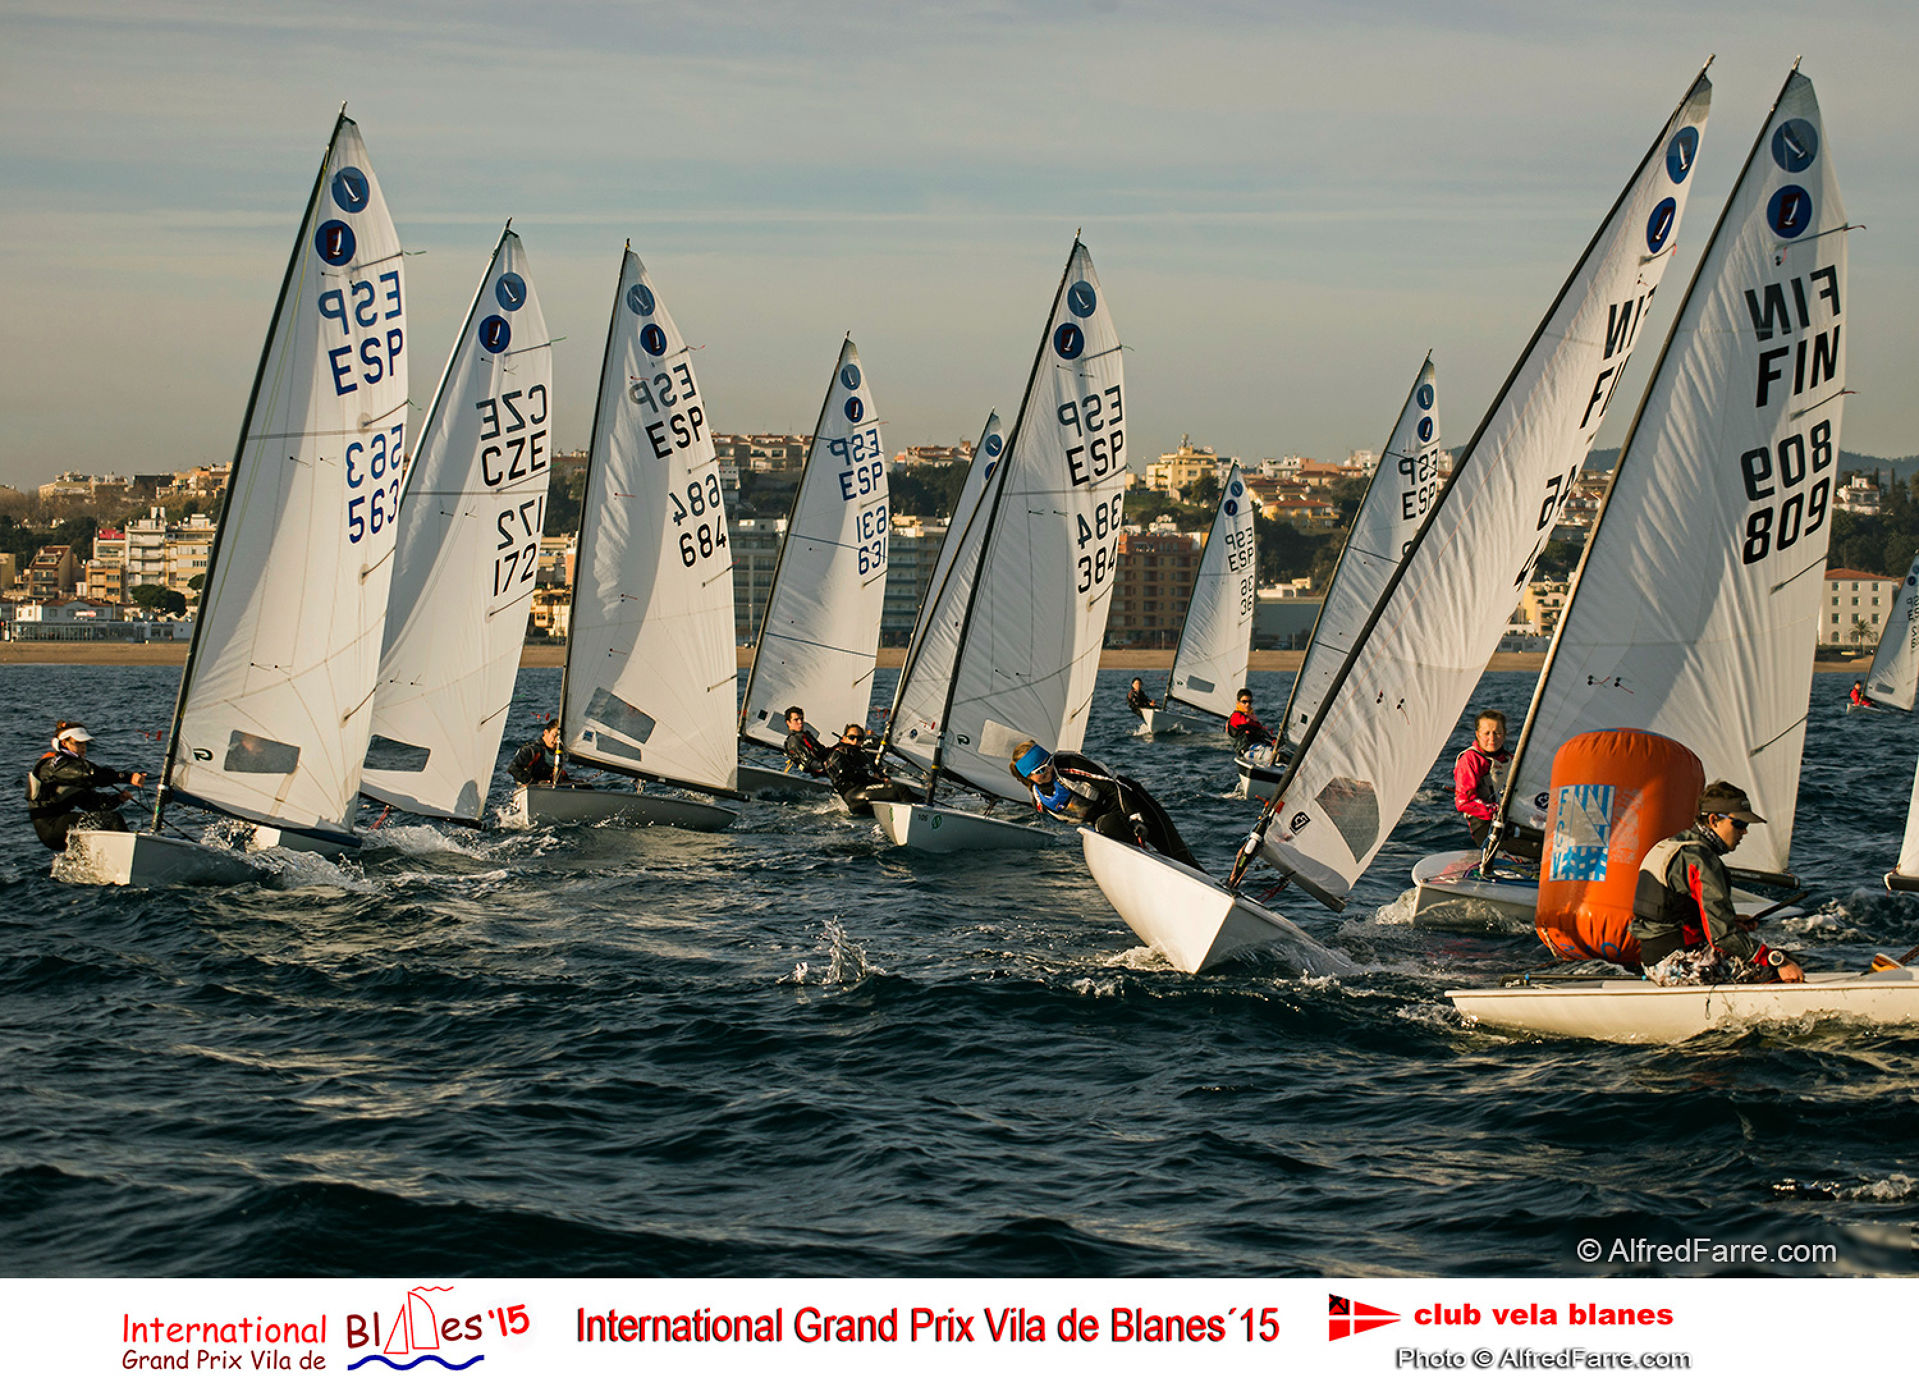 The first day of the International Grand Prix Vila Blanes is finished with 7 excelent races